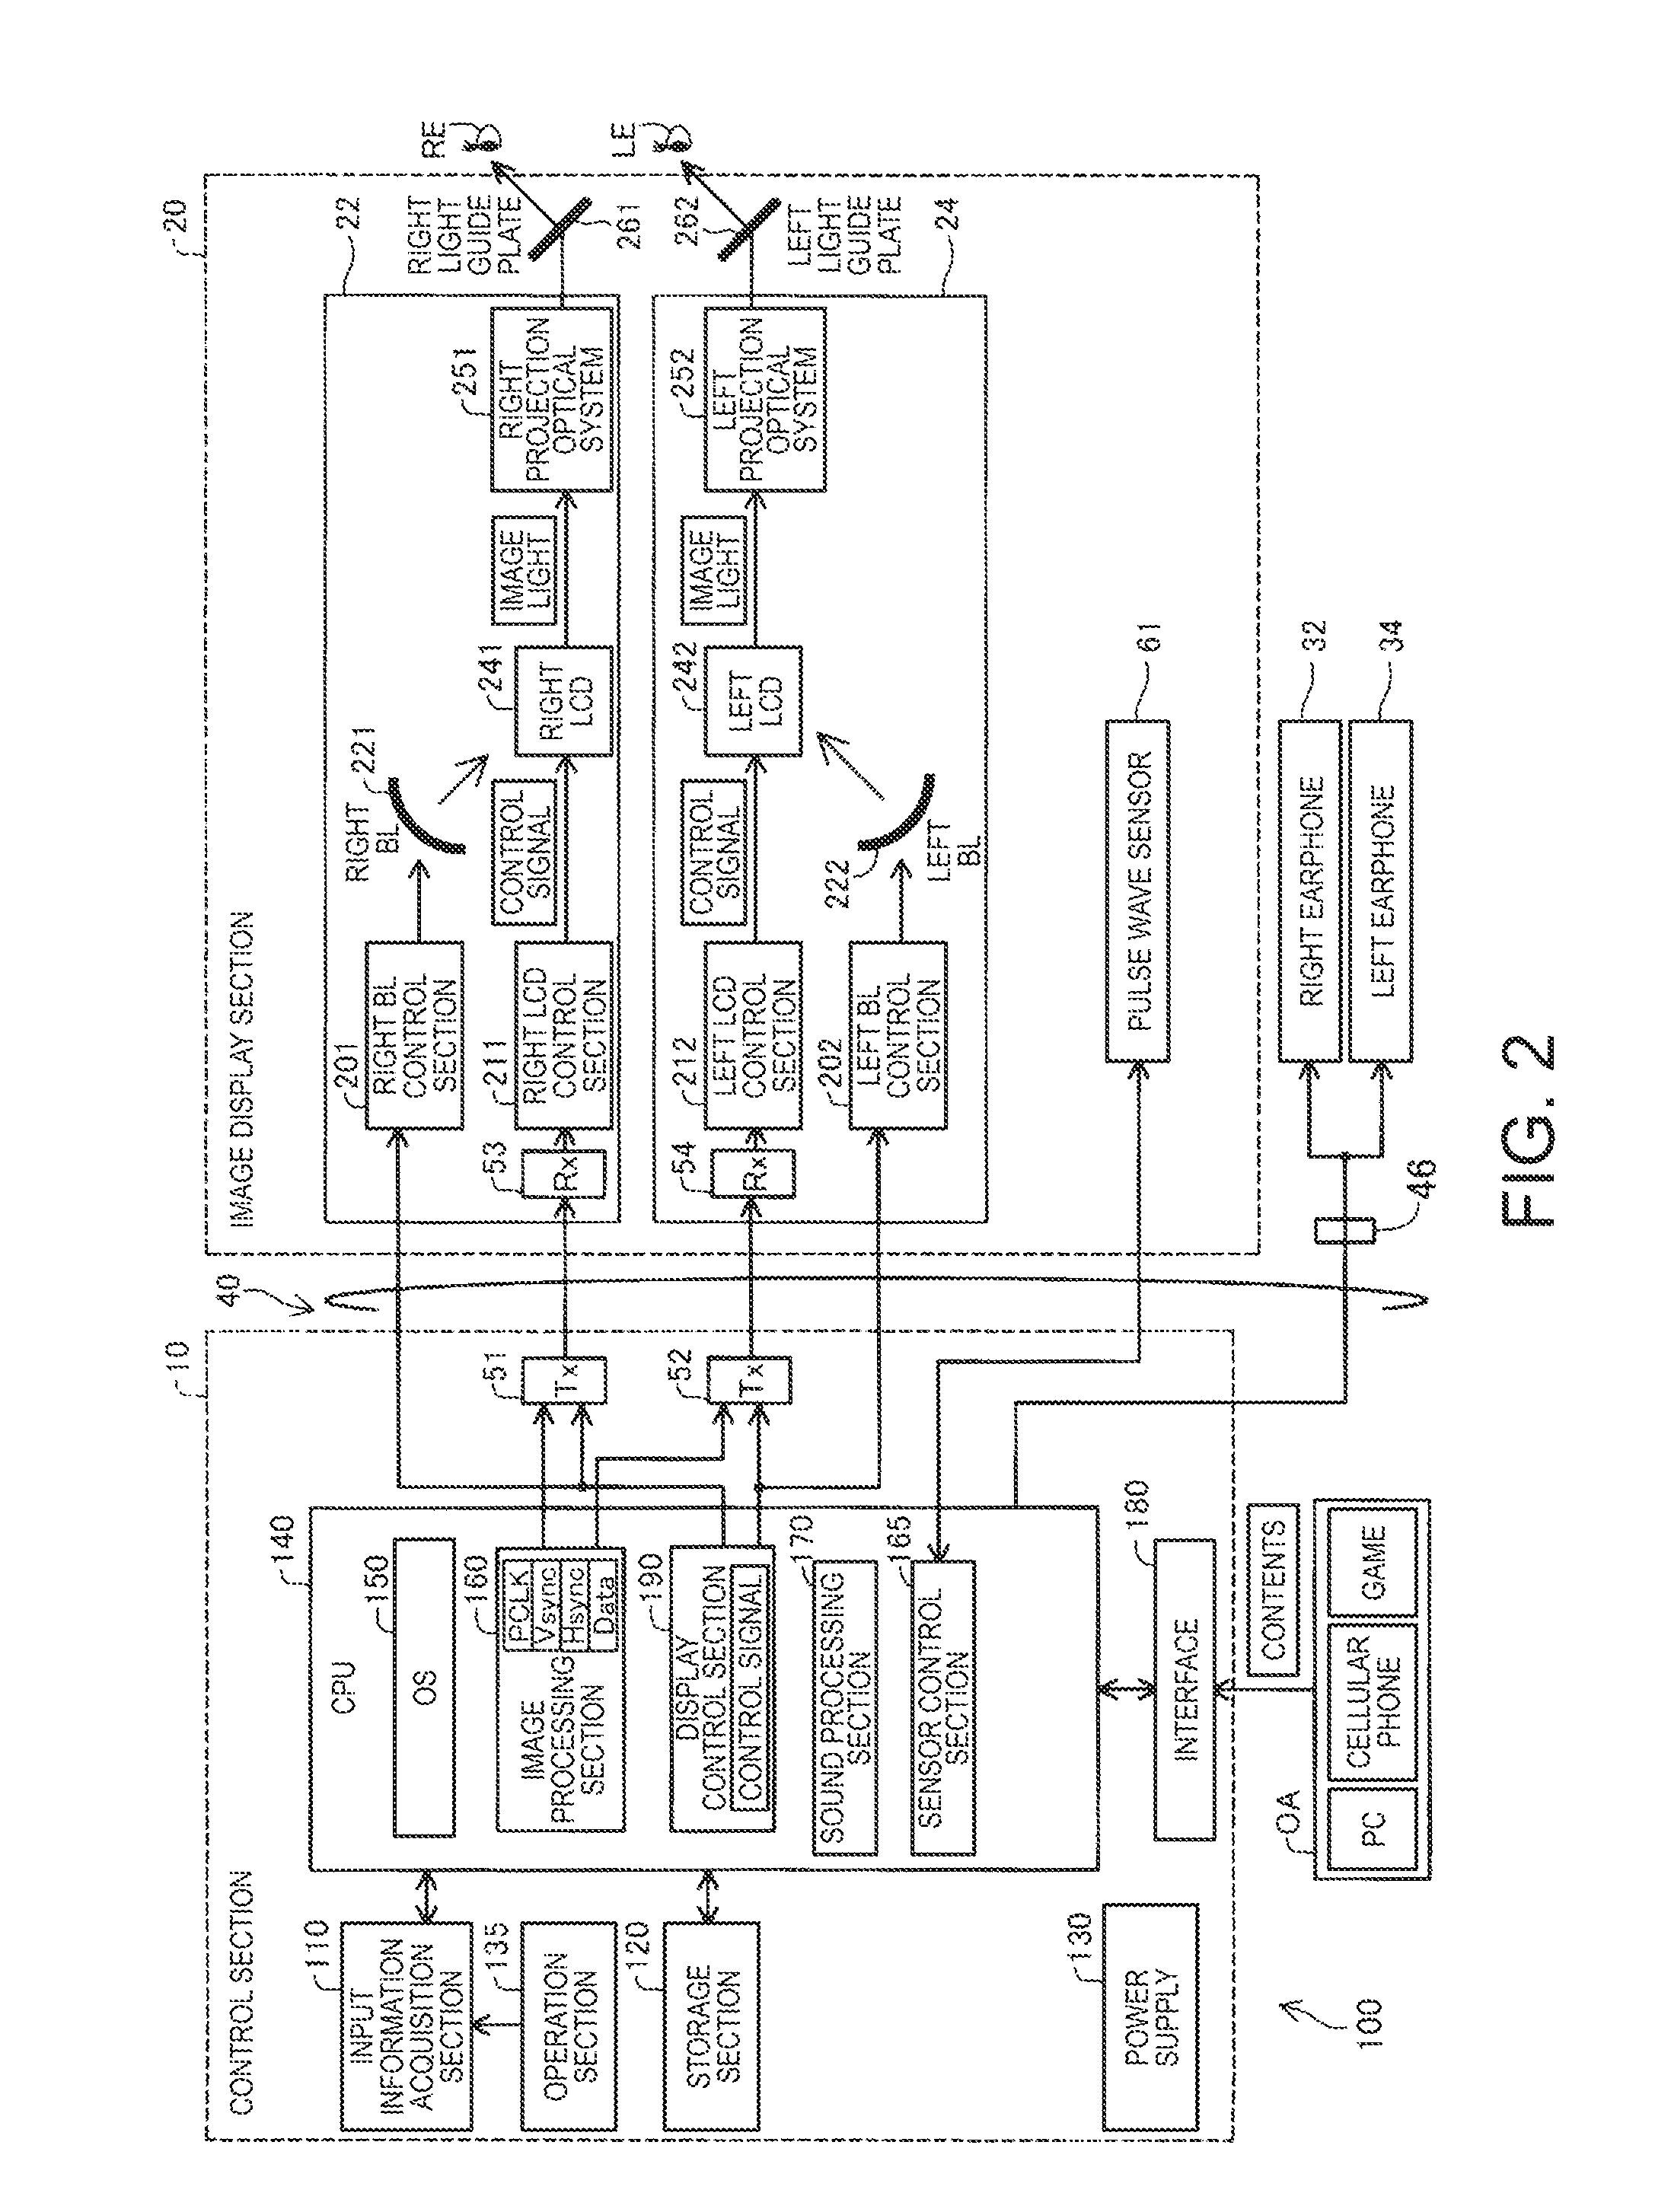 Head-mount type display device and method of controlling head-mount type display device